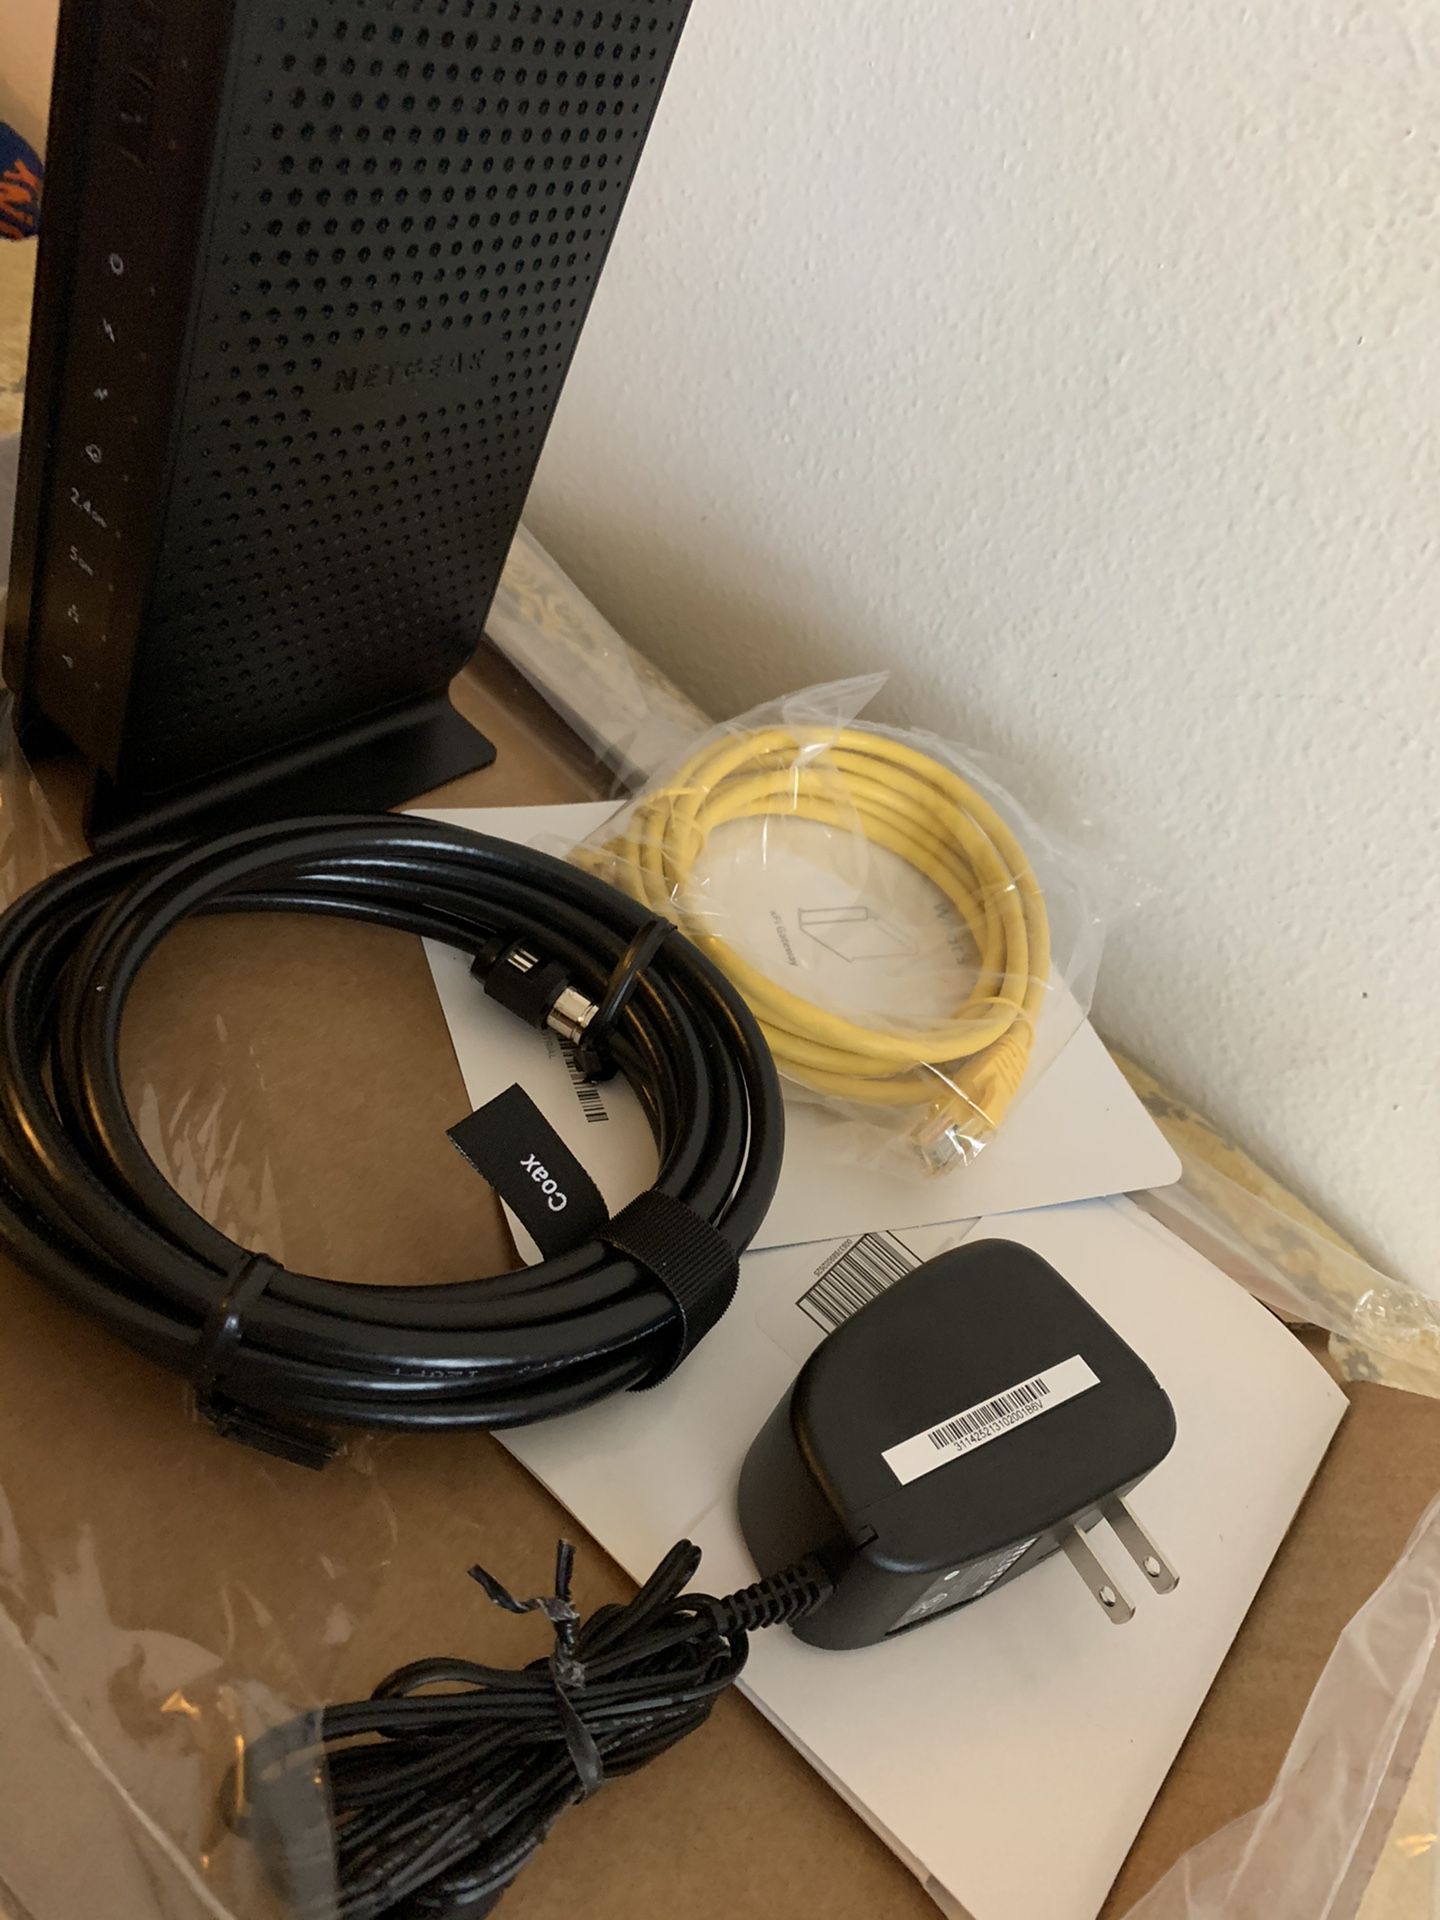 Xfinity Comcast modem router, cable coax, WiFi cable.